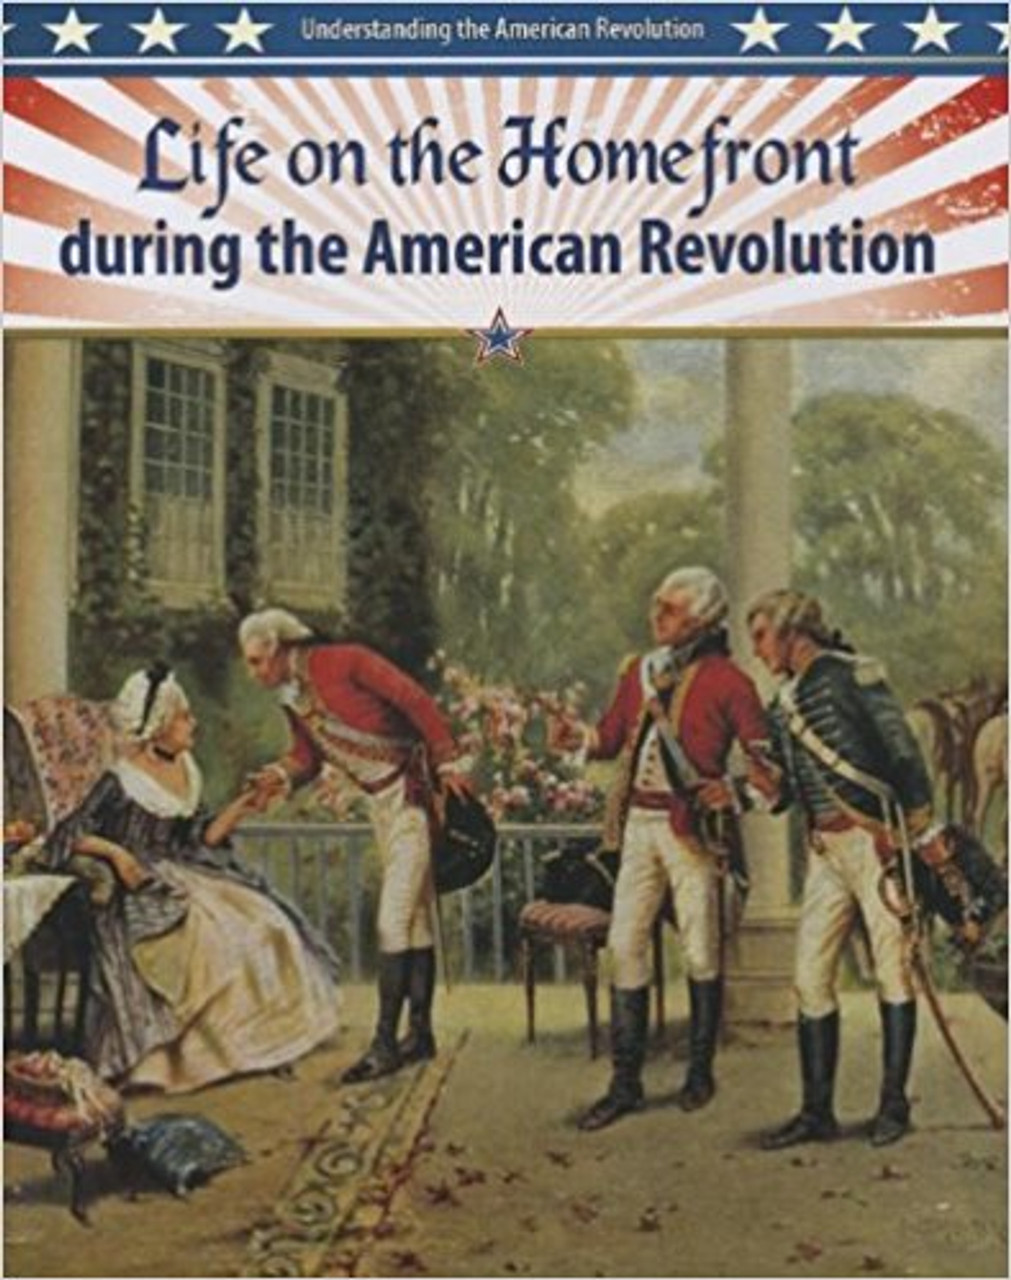 Life on the Homefront During the American Revolution by Helen Mason